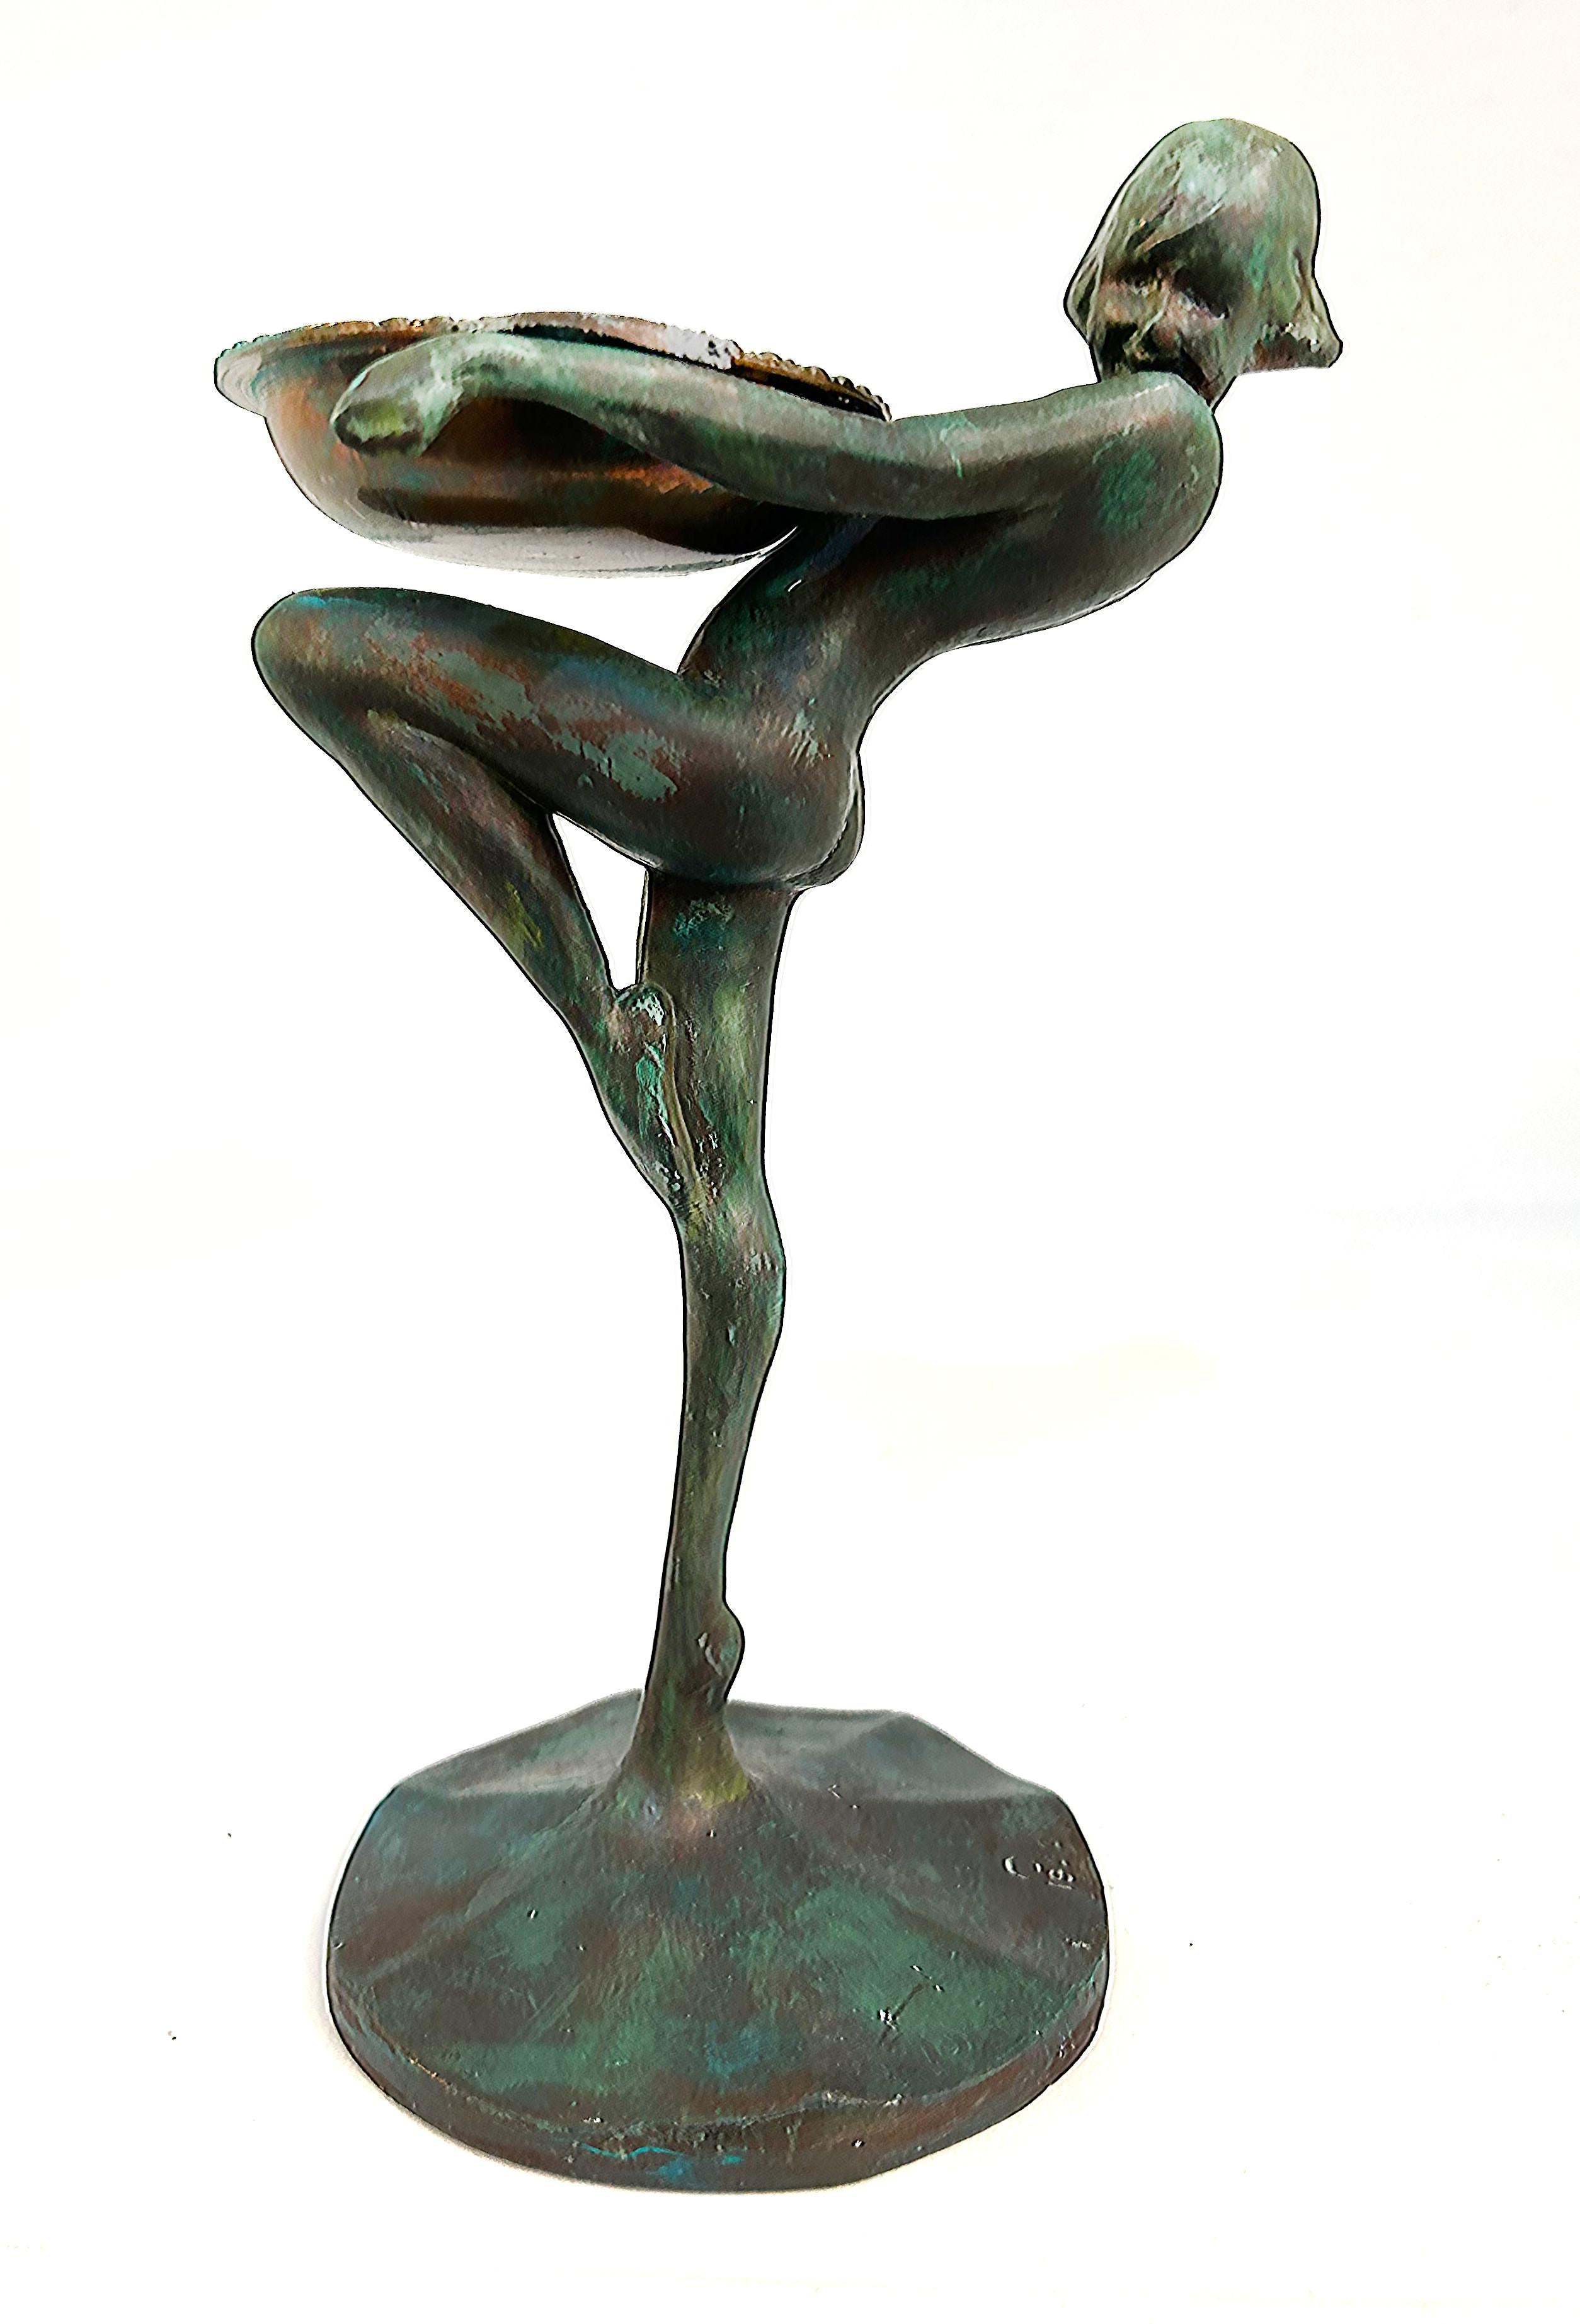 Art Deco Bronze Sculpture Attributed to Frankart With 1922 Copyright to Base

Offered for sale is an Art Deco bronze sculpture attributed to Frankart with an impressed copyright date of 1922 to base. The sculpture is patinated and does show some